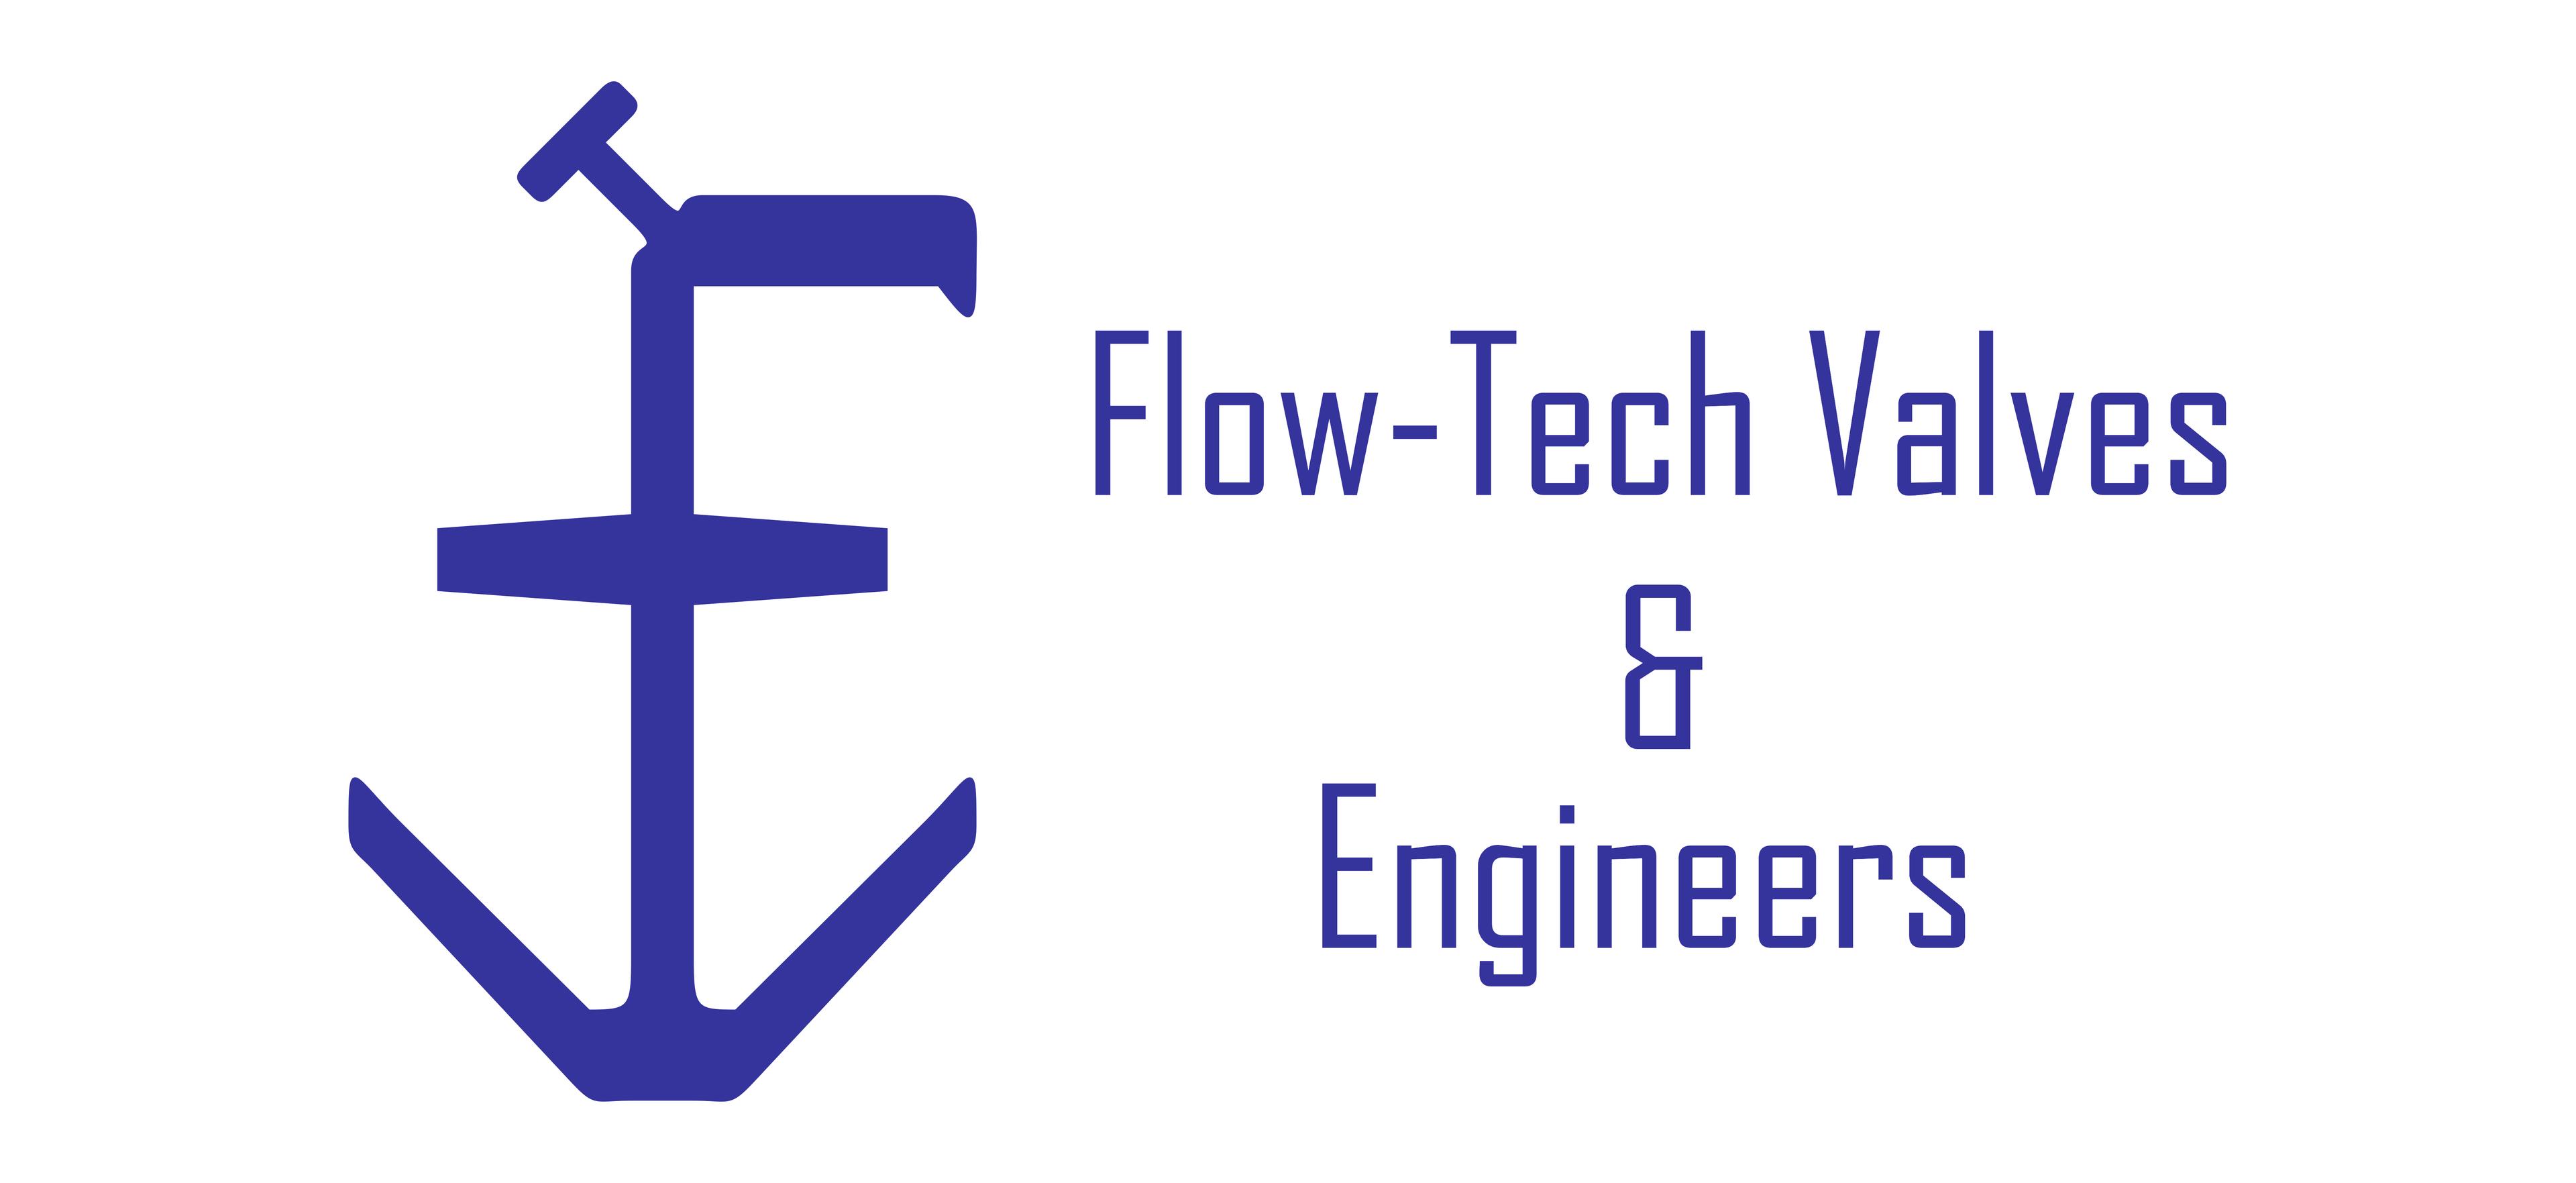 Flow-Tech Valves and Engineers